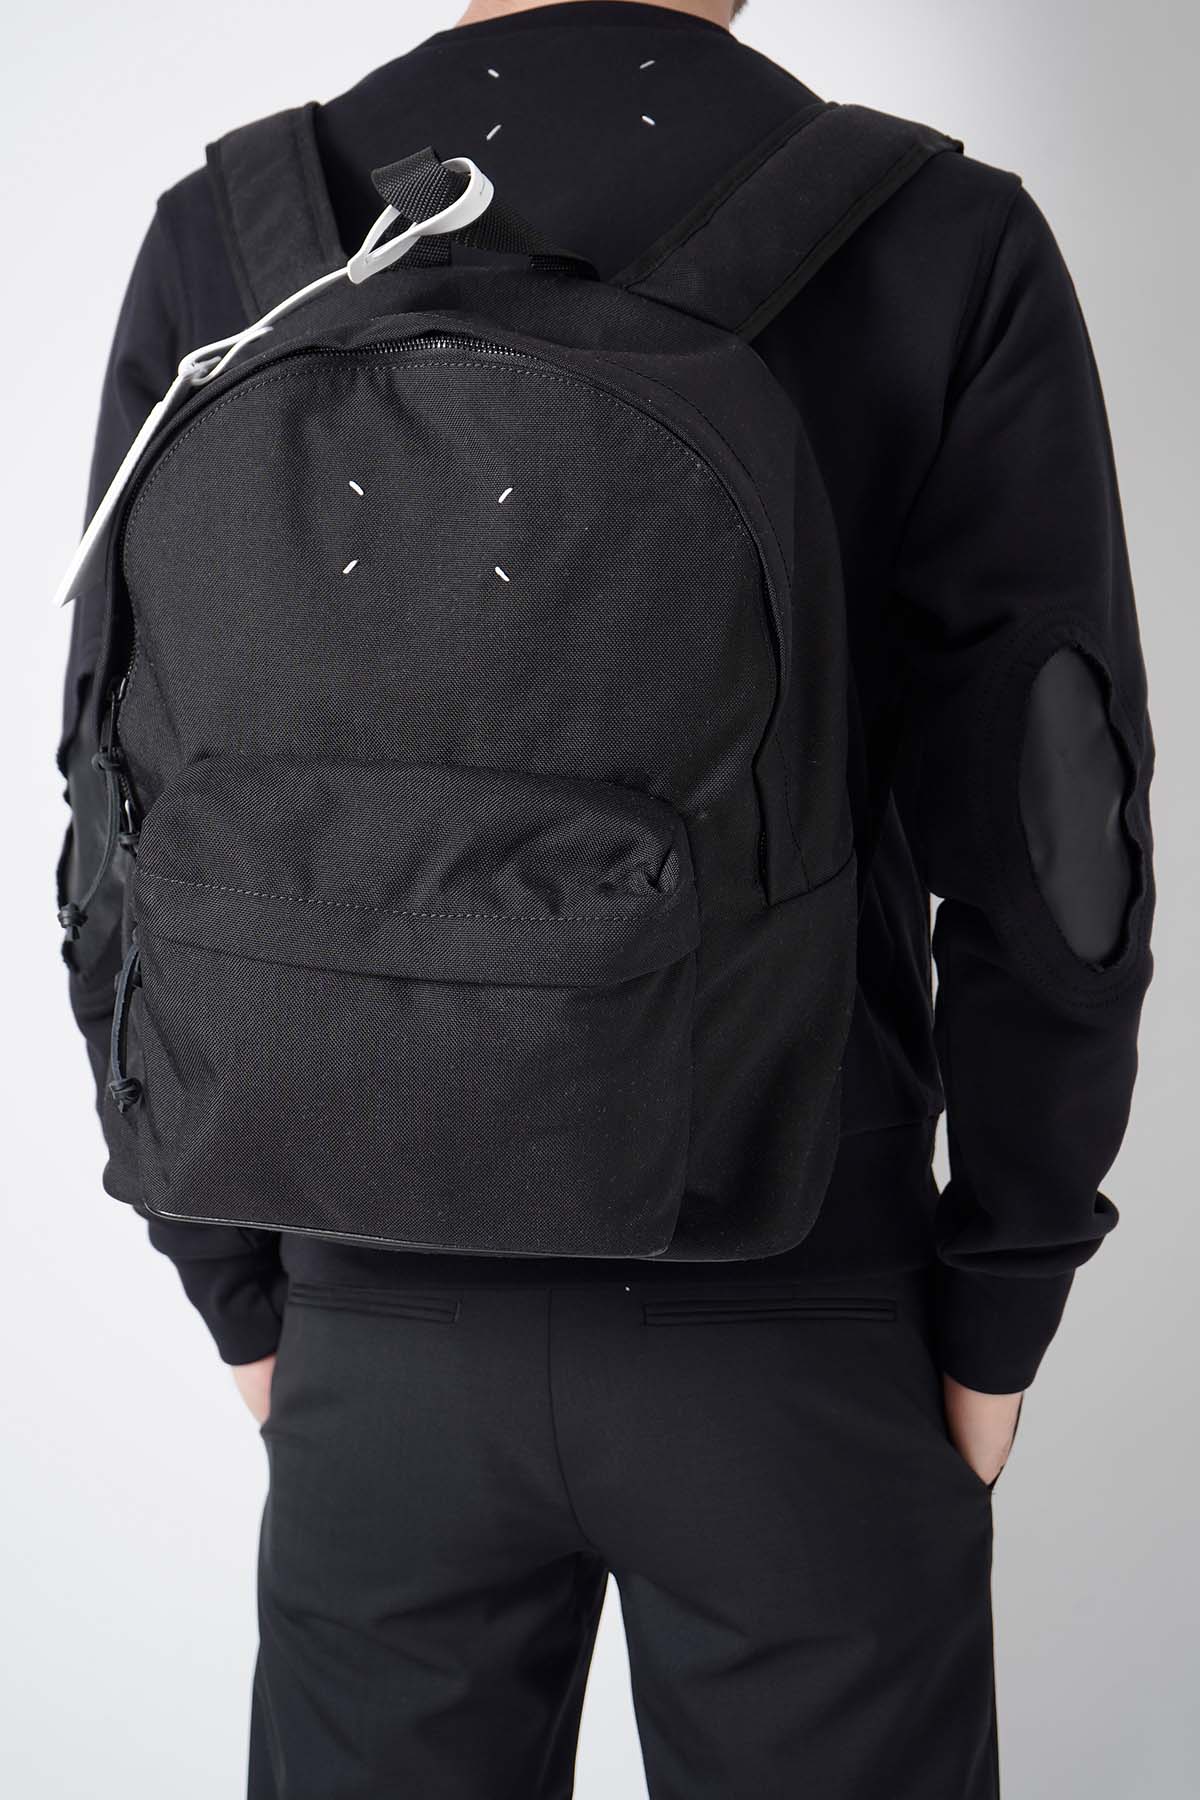 Backpack［2021SS］